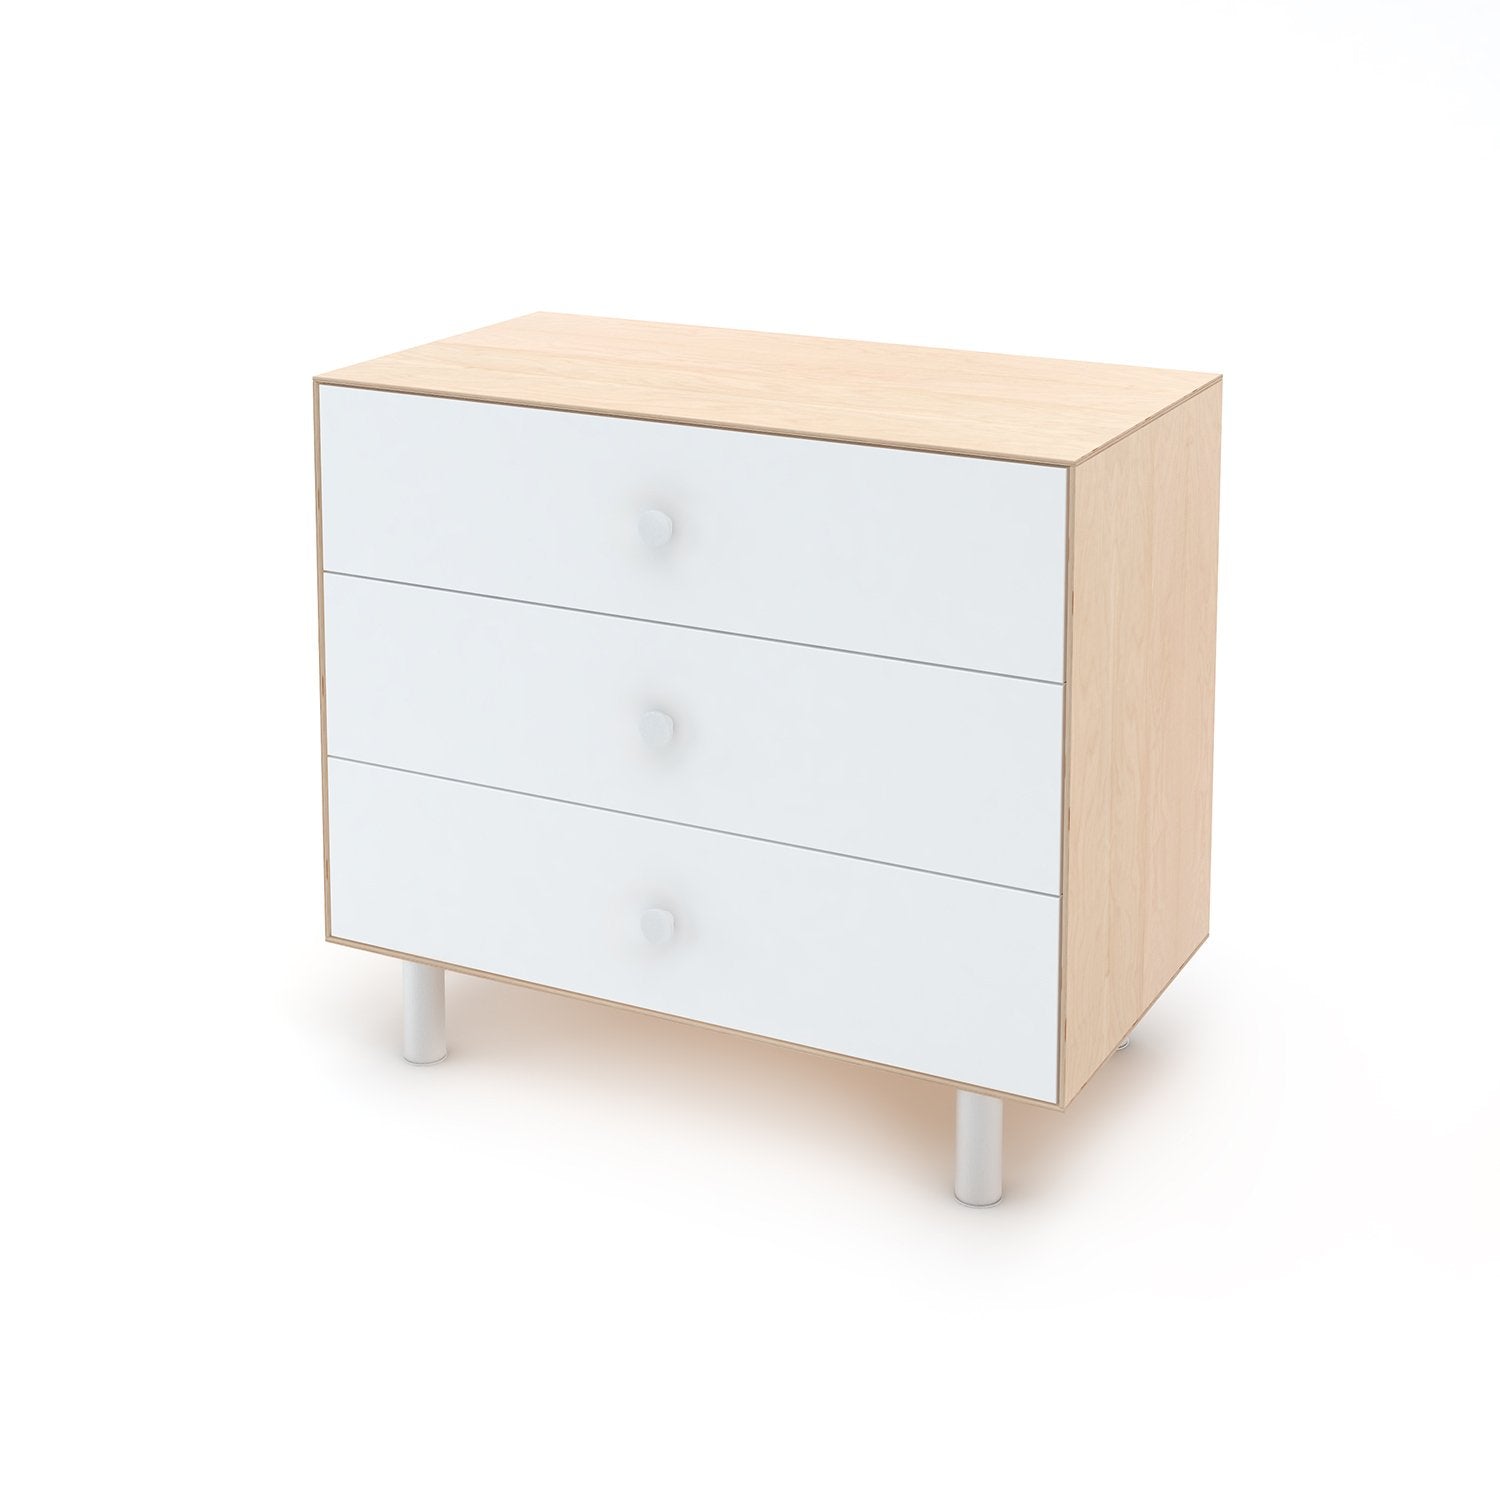 Oeuf Merlin 3 Drawer Dresser with Classic Legs – available in 3 colours